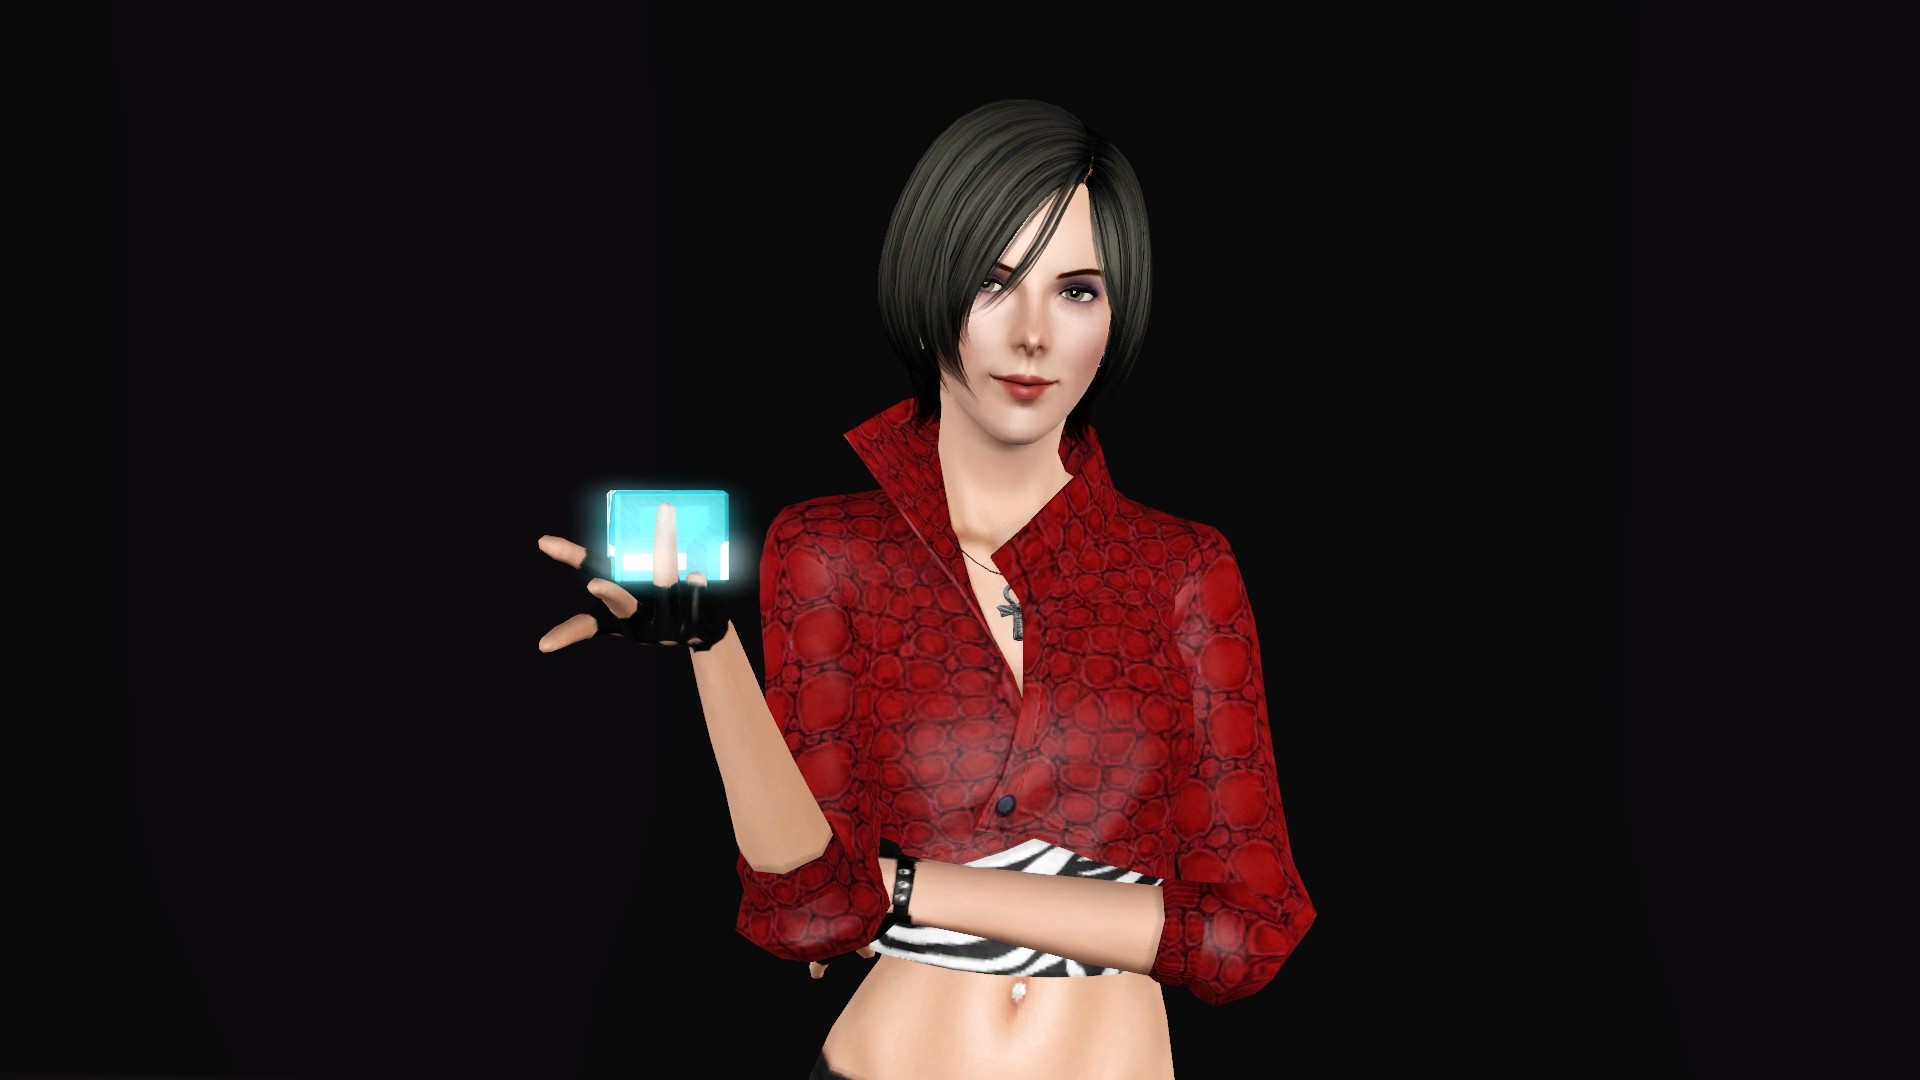 1920x1080 ... Sims 3 Ada Wong (screenshot only) by madevil-andy